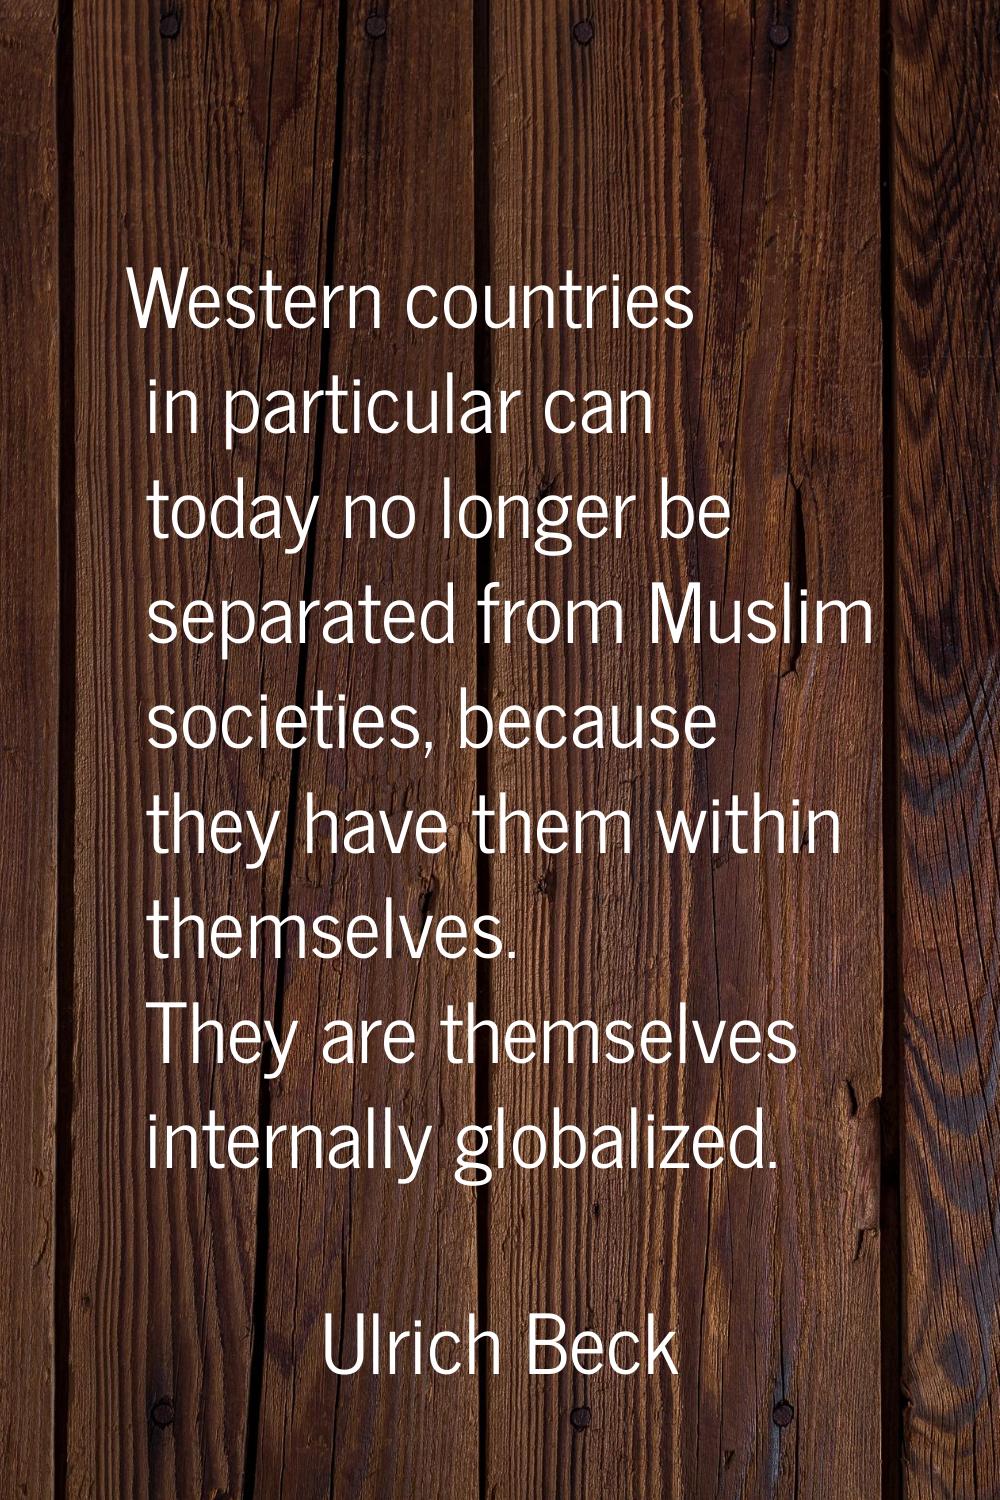 Western countries in particular can today no longer be separated from Muslim societies, because the